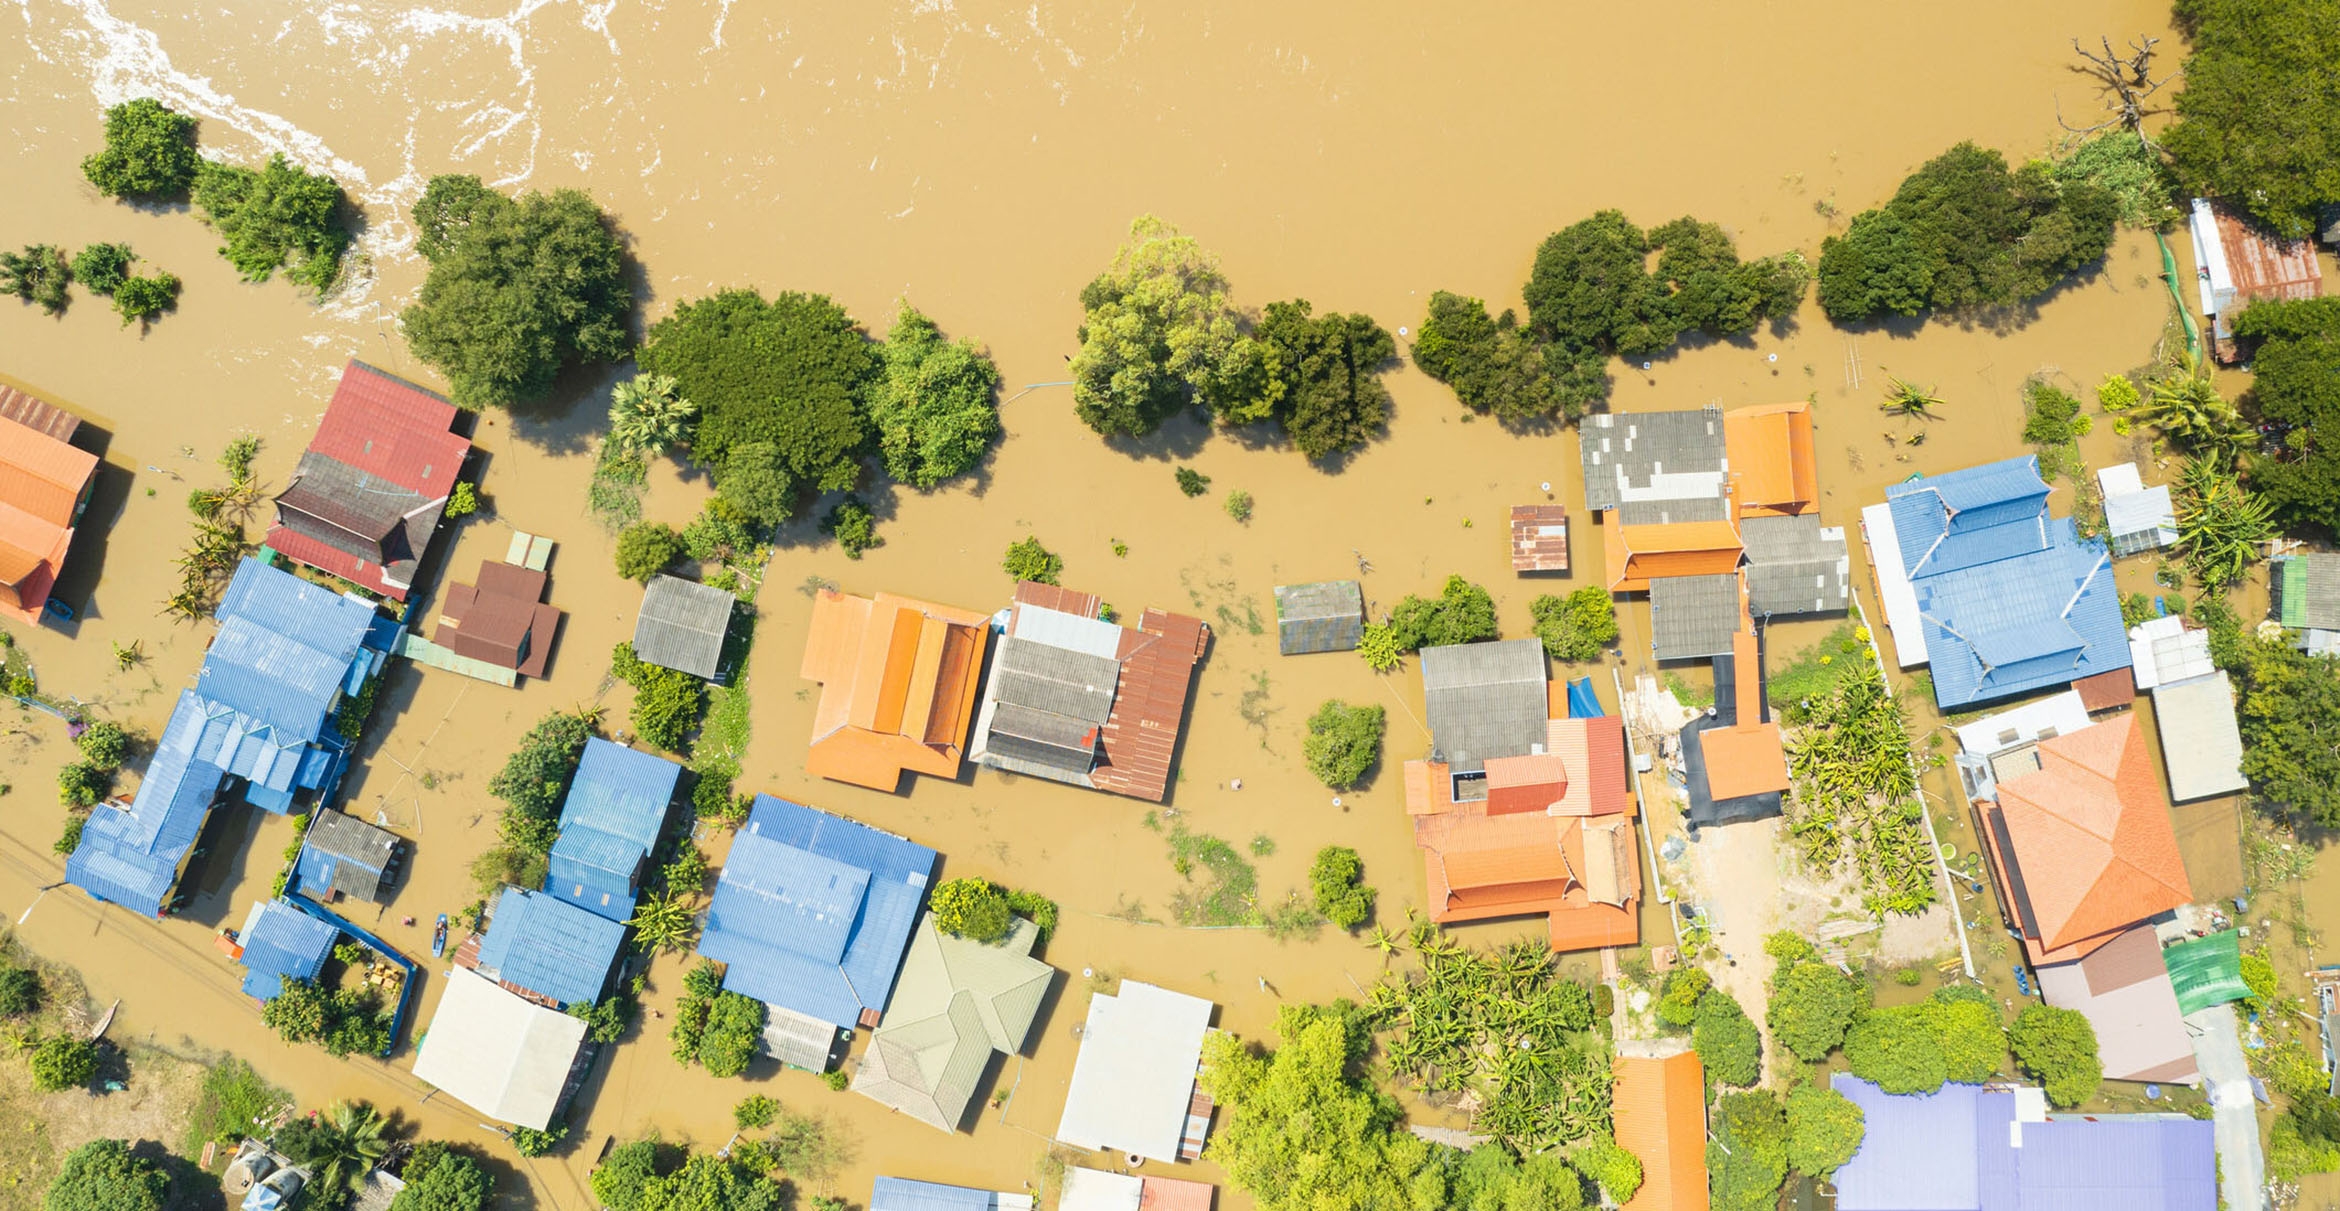 Houses submerged after a flood in Thailand